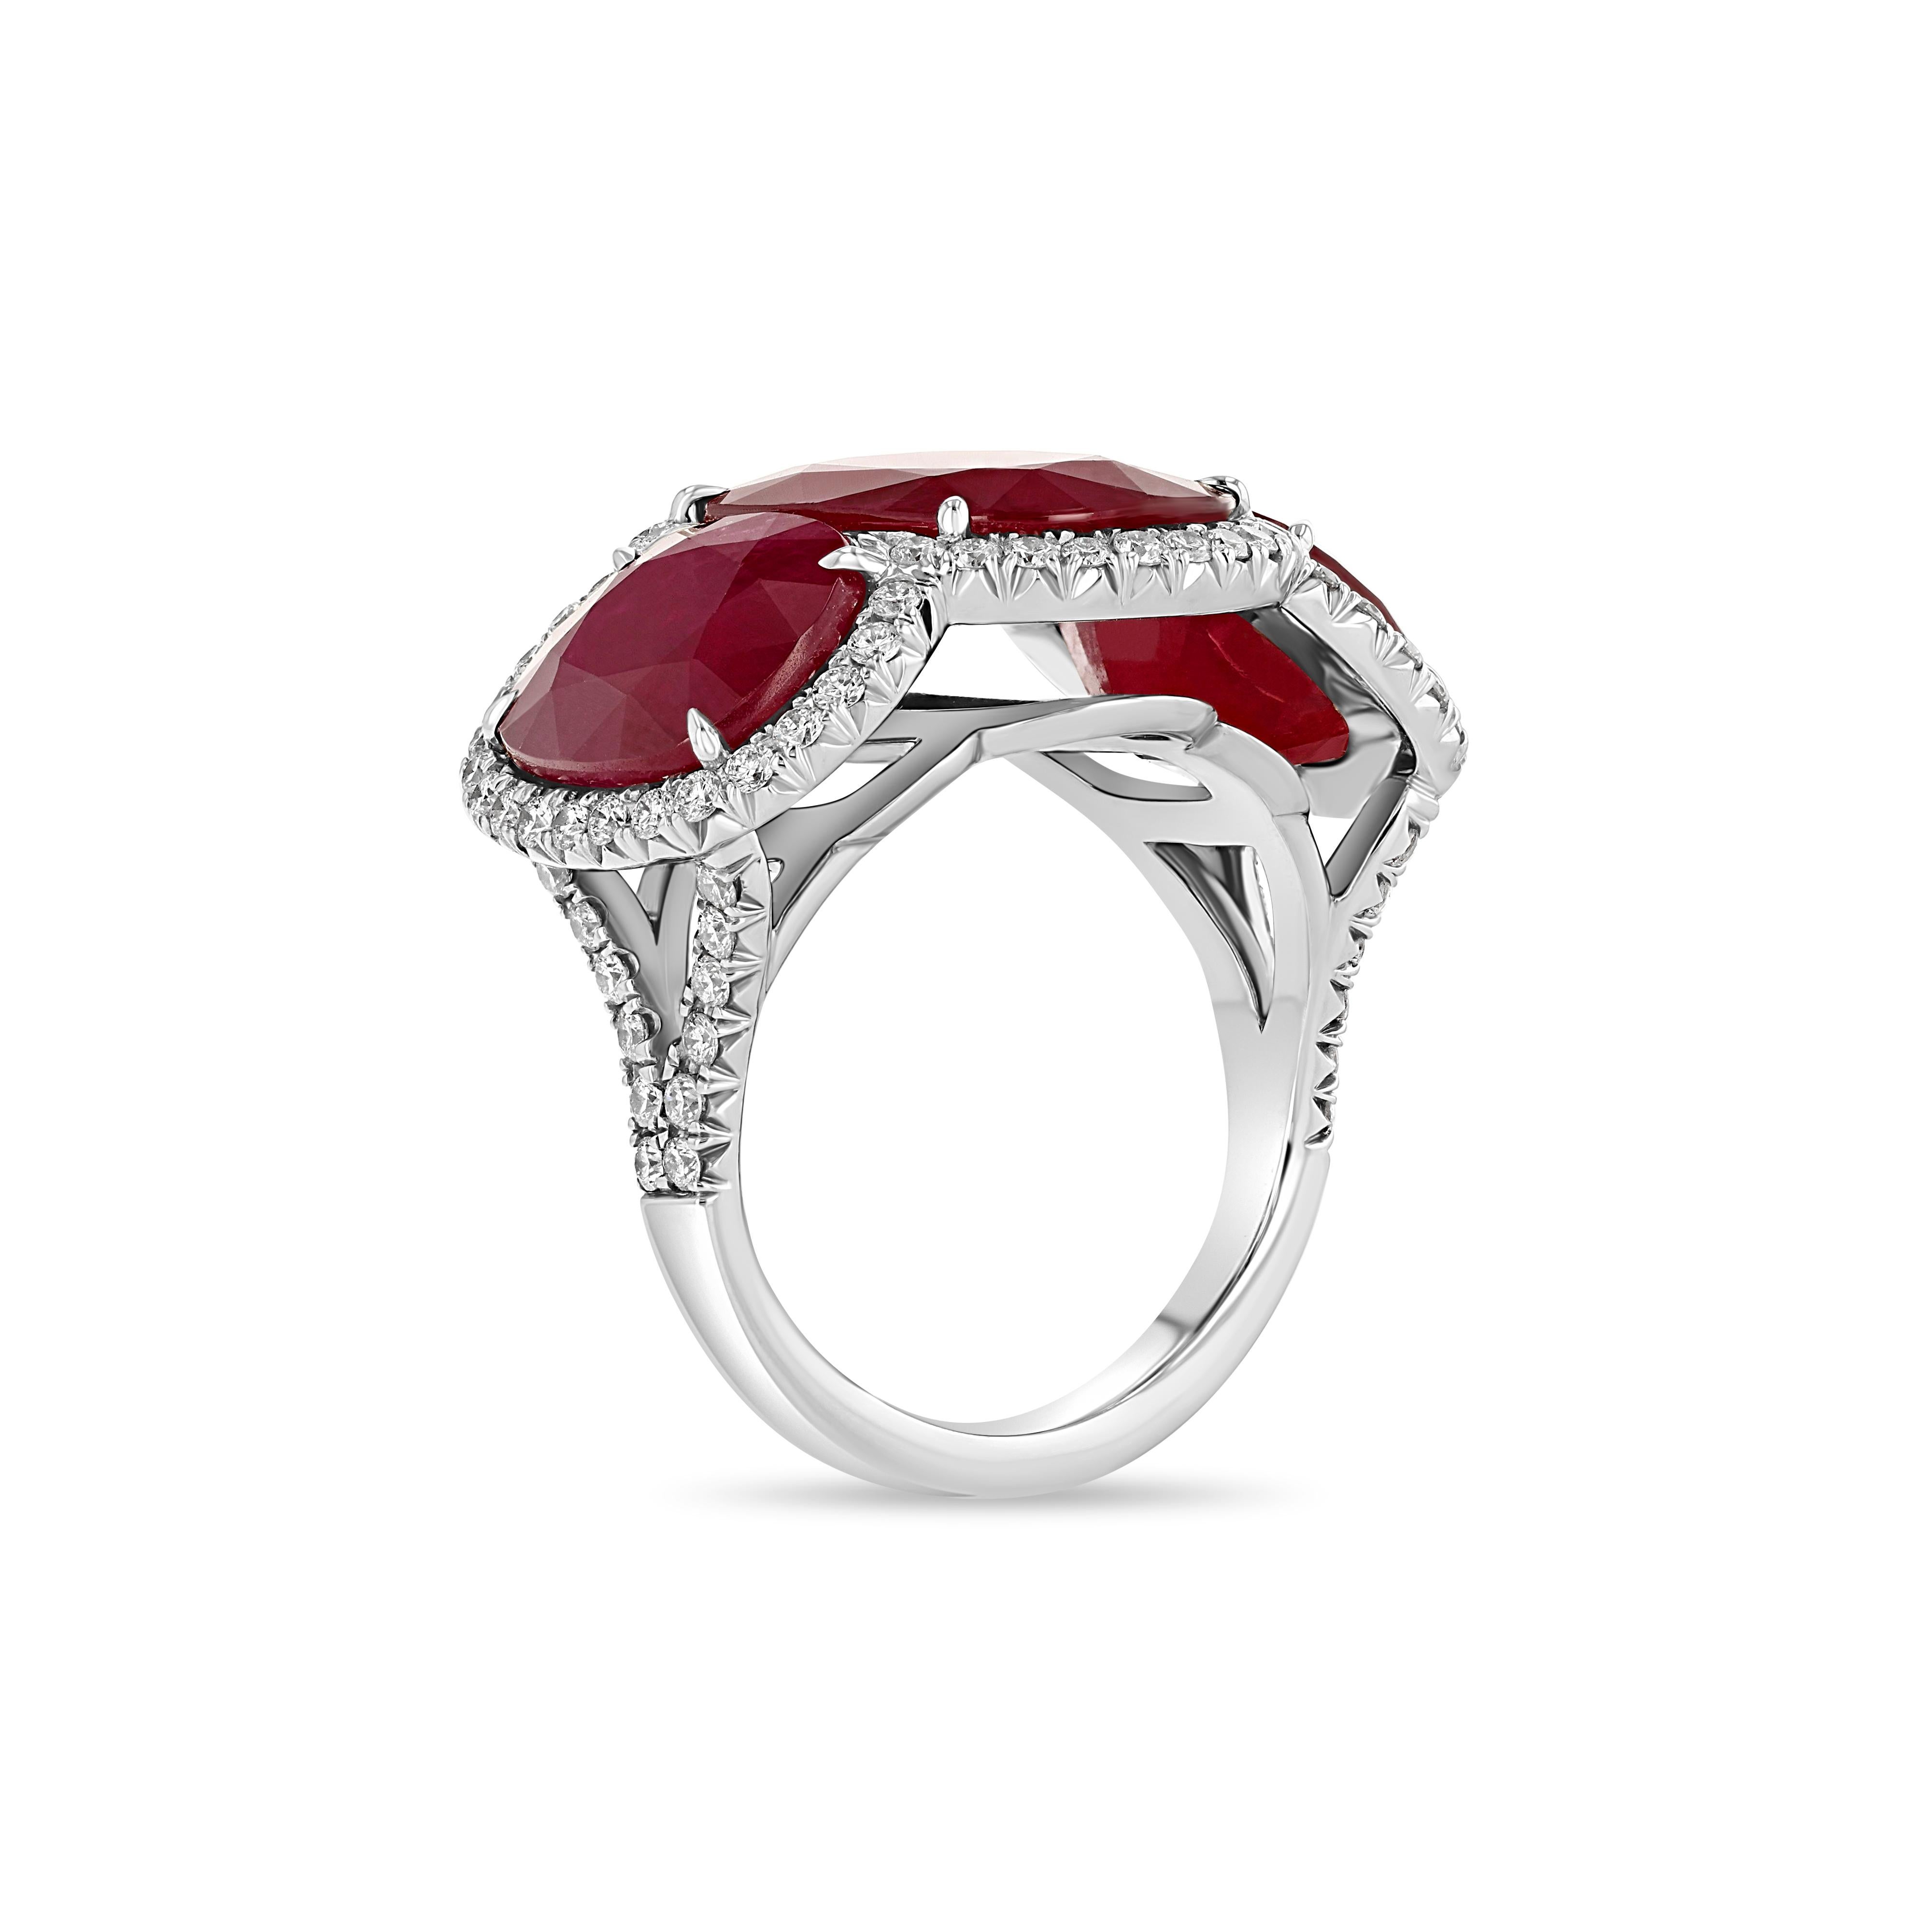 An elegant ring consisting of three rubies delicately accented by several diamonds.
 
Total Weight : Approx 17.00 Ct
Colour : Intense Red
Shape/ Style : Oval/ Mixed Cut
Transparency : Transparent 

Dimensions : From Approx. 10.54 x 8.85 . 5.30 mm
to